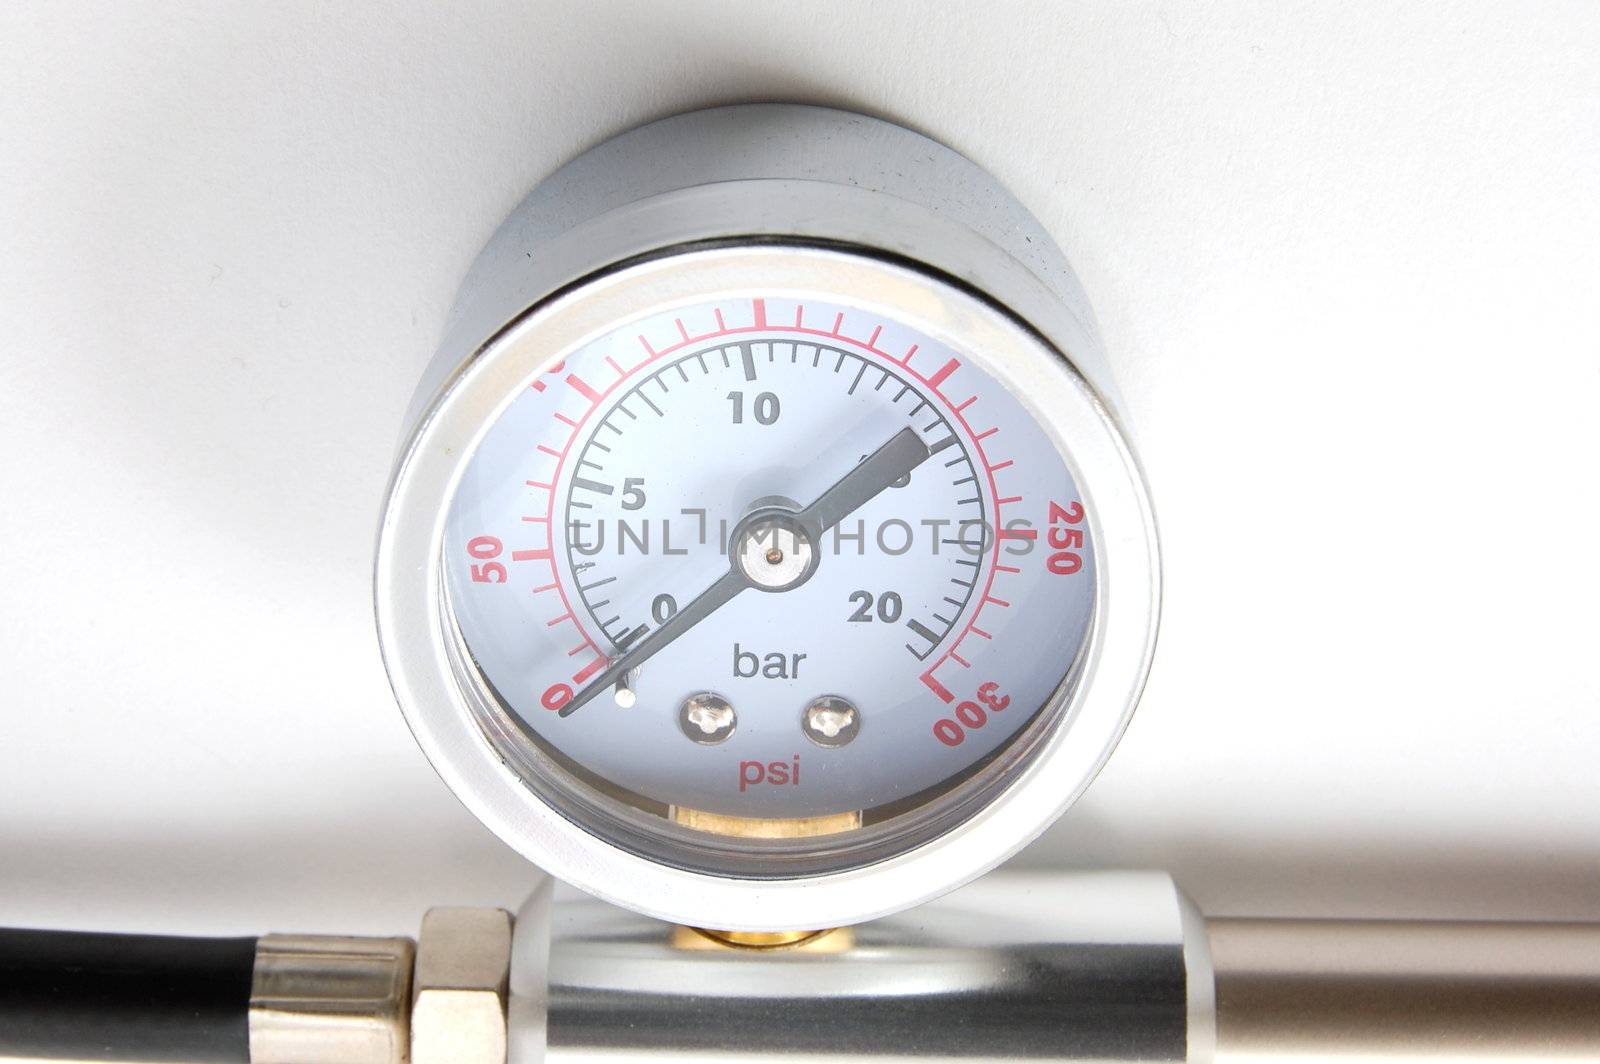 high pressure barometer of a pump on white background